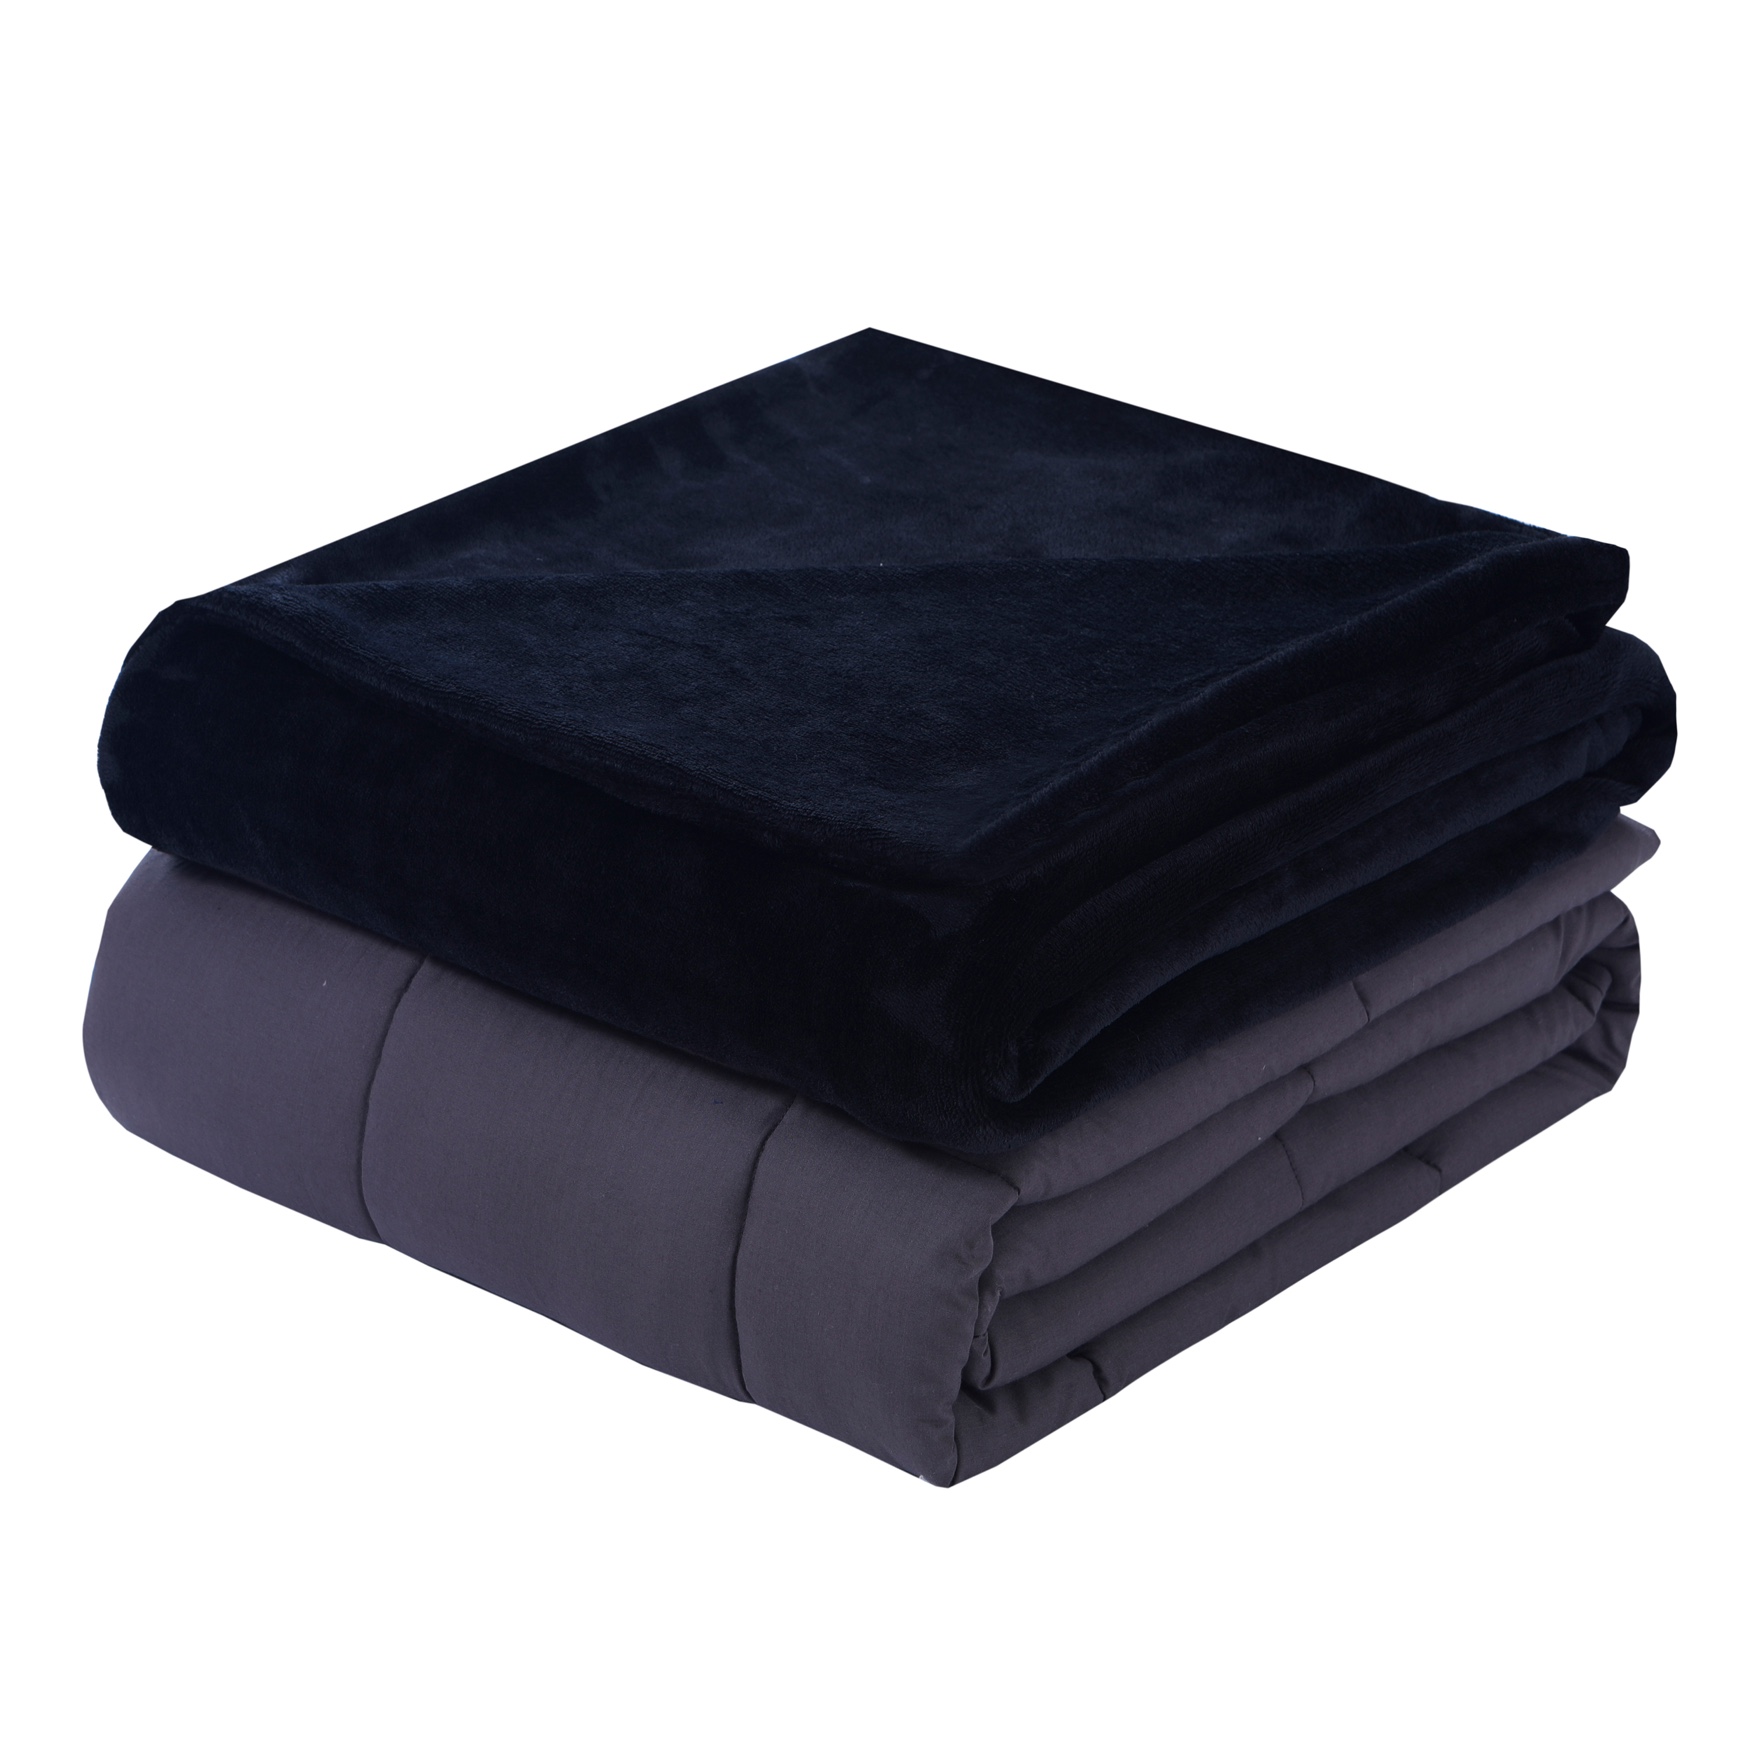 Plush 15lb Weighted Blanket with Washable Cover , 